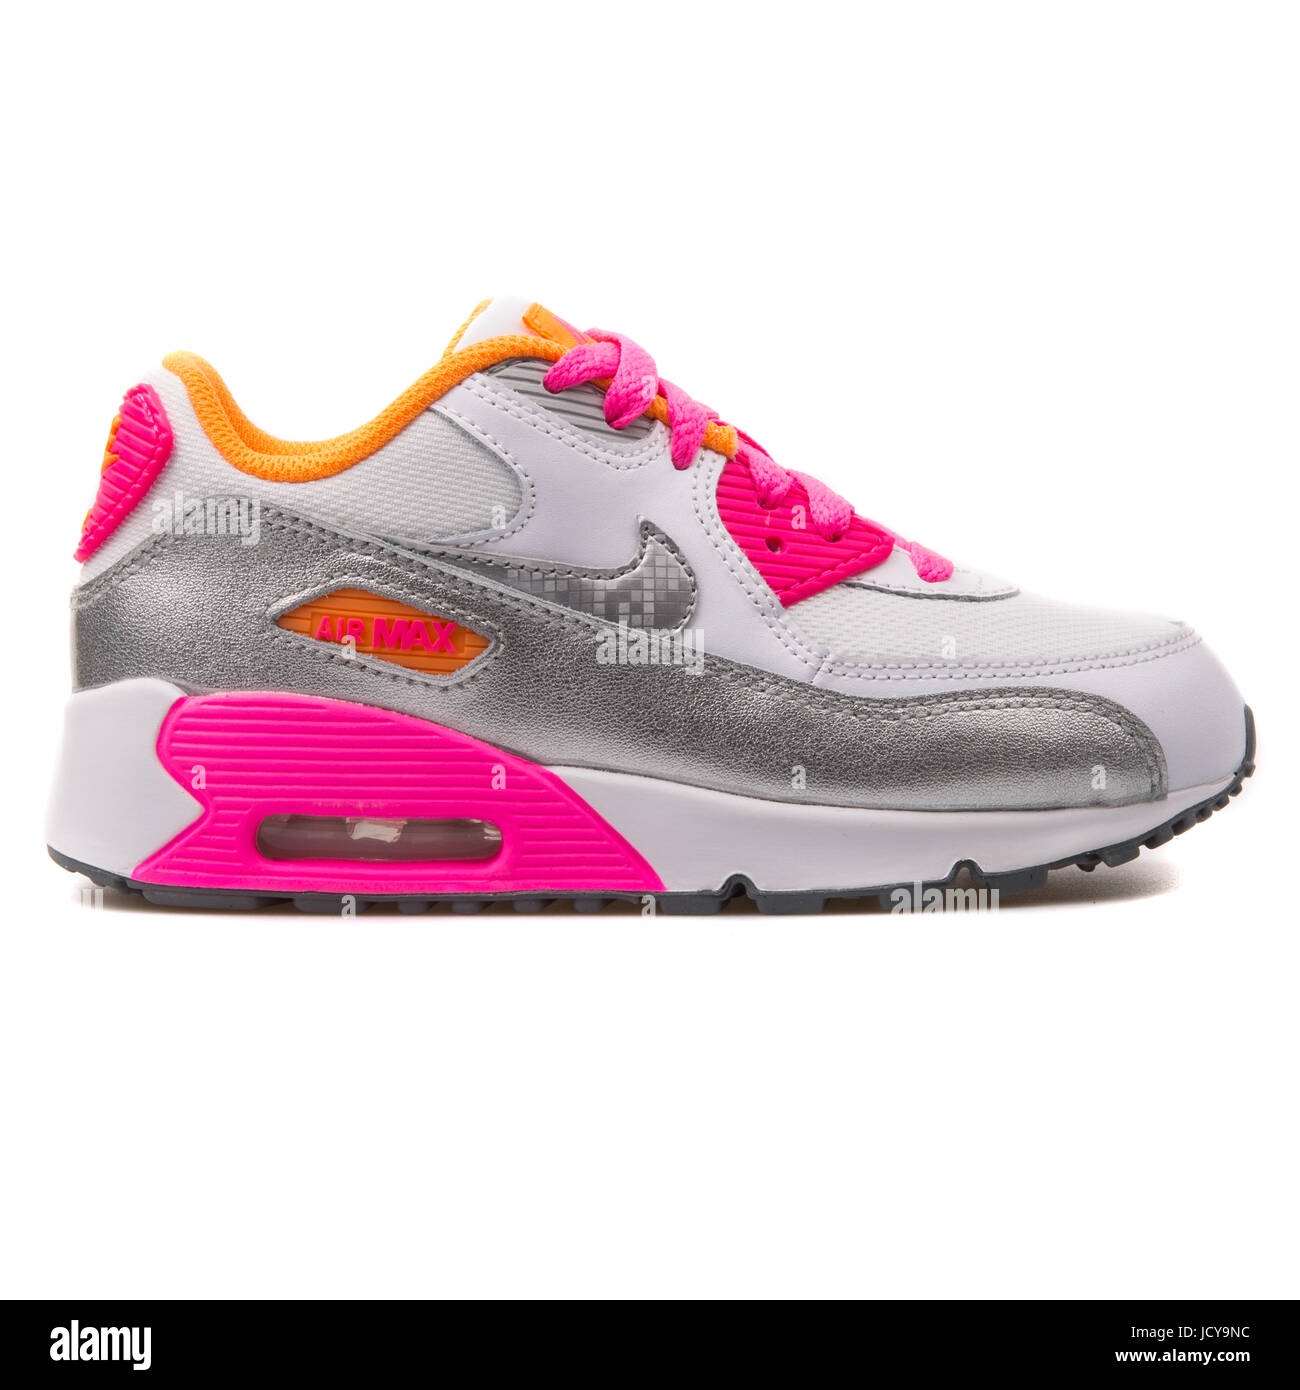 Nike Air Max 90 Mesh (PS) White, Silver and Pink Kid's Running Shoes -  724856-101 Stock Photo - Alamy